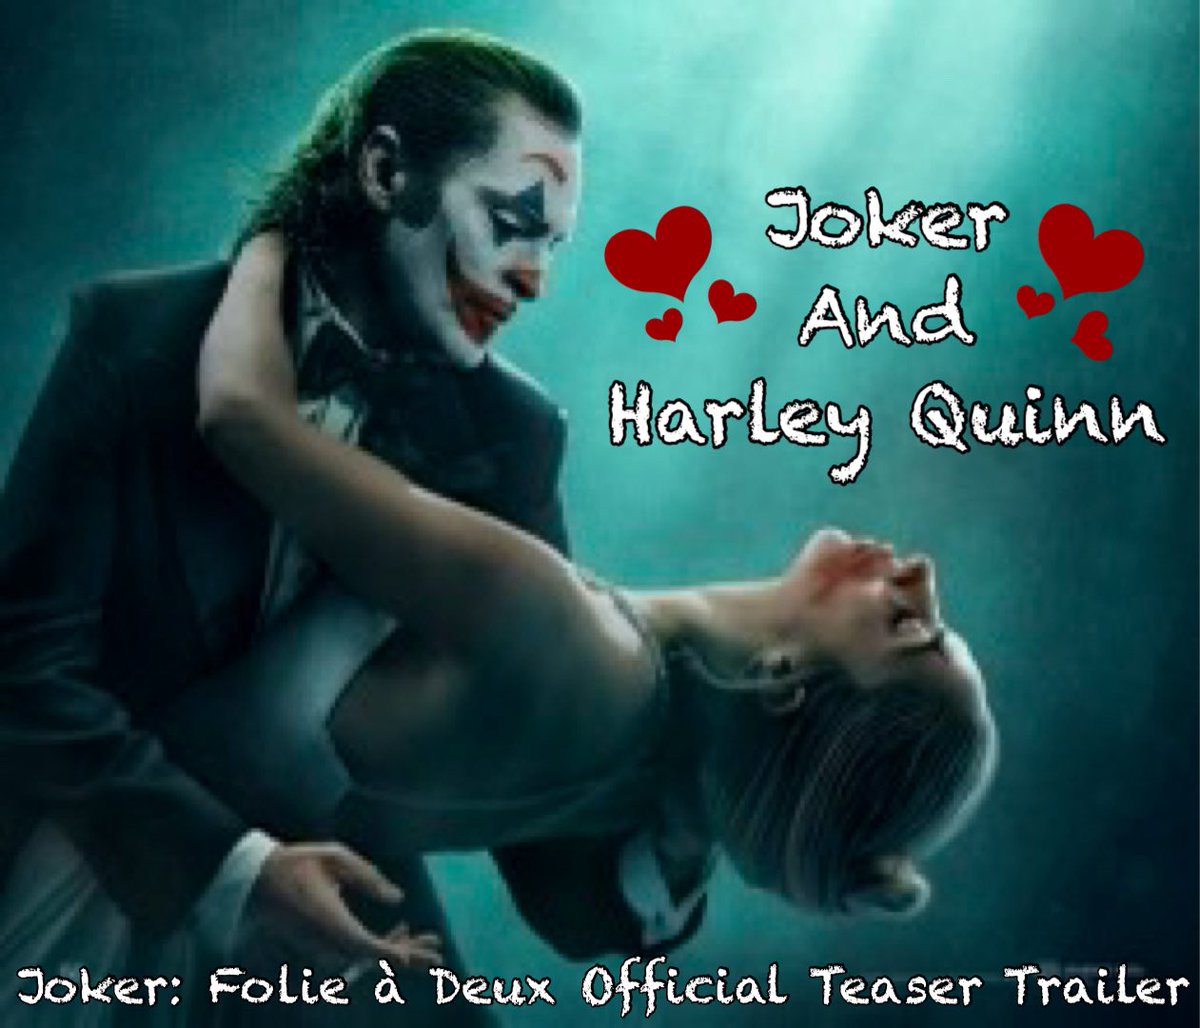 Check out my reaction and review video of Joker: Folie à Deux on YouTube at Cateyes Games 😸🎮 #joker #arthurfleck #HarleyQuinn #joaquinphoenix #ladygaga #dccomics #youtubechannel #cinephile #subscribe #follow #followback #Reaction